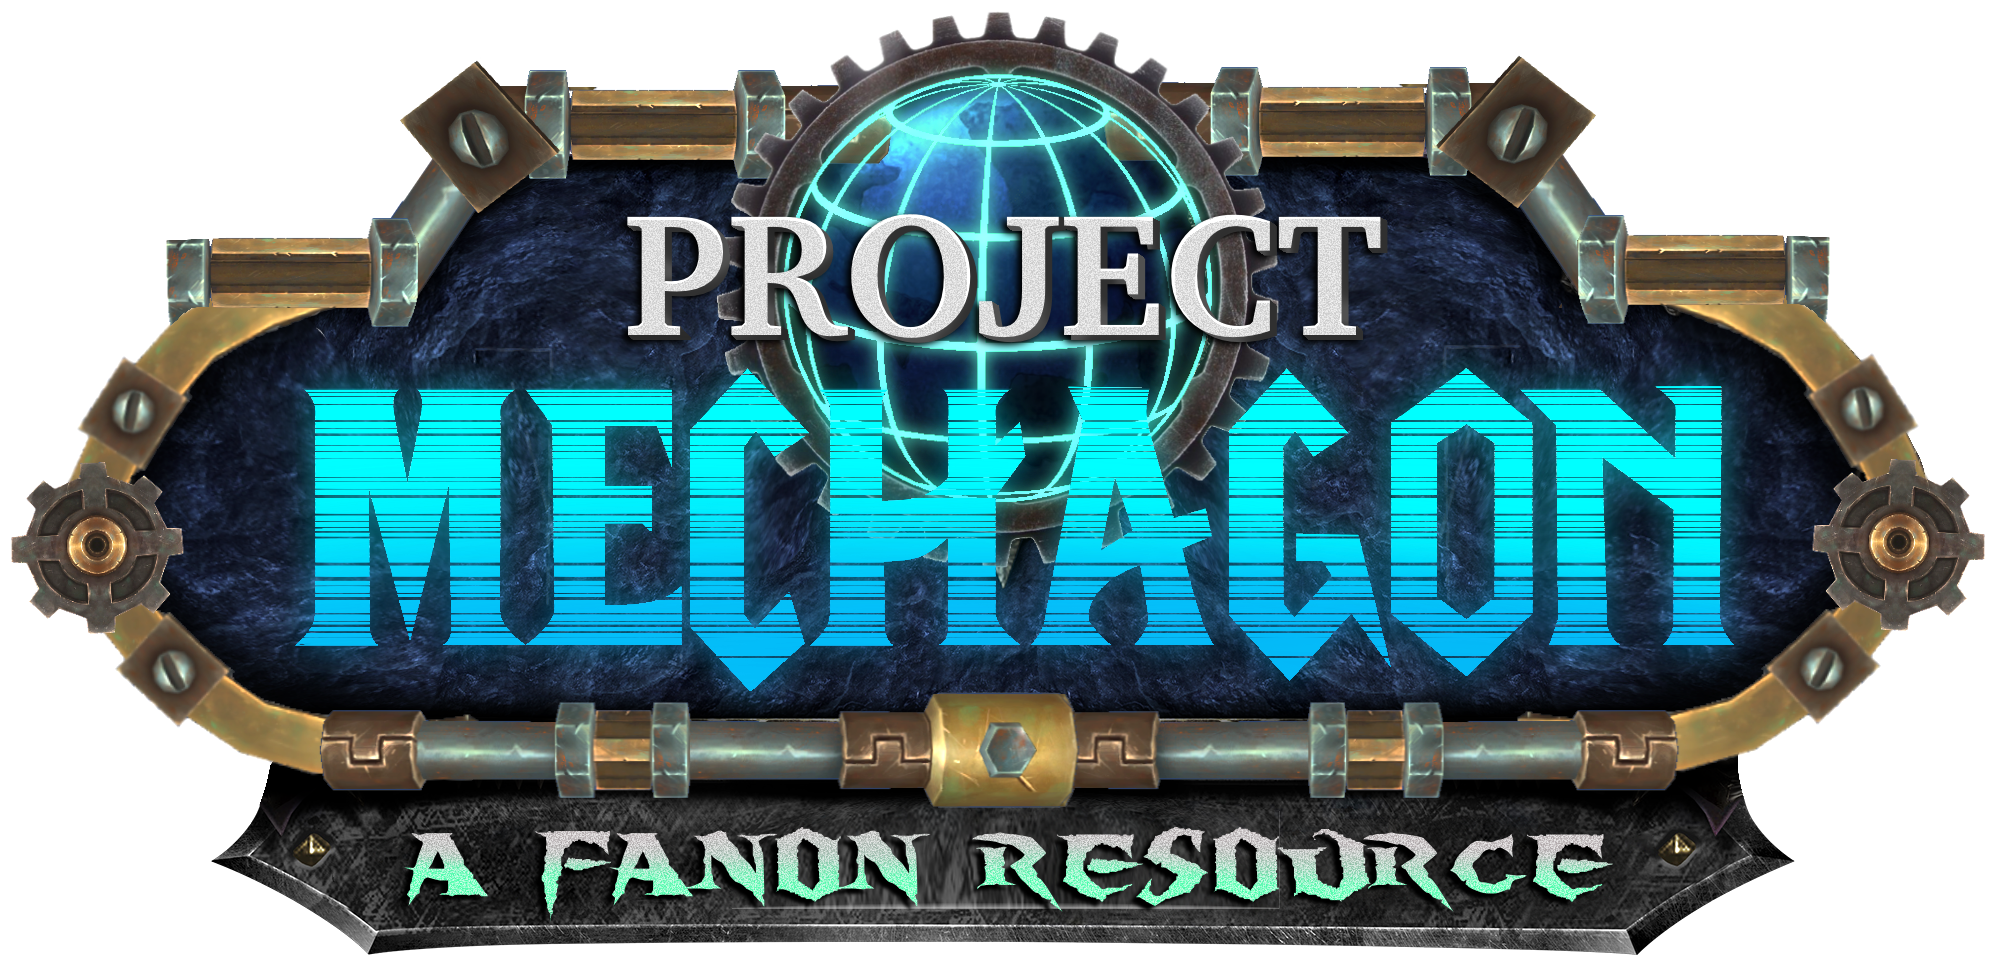 A World of Warcraft style logo in blue tones and a steampunk-style border reading Project Mechagon, A Fanon Resource.